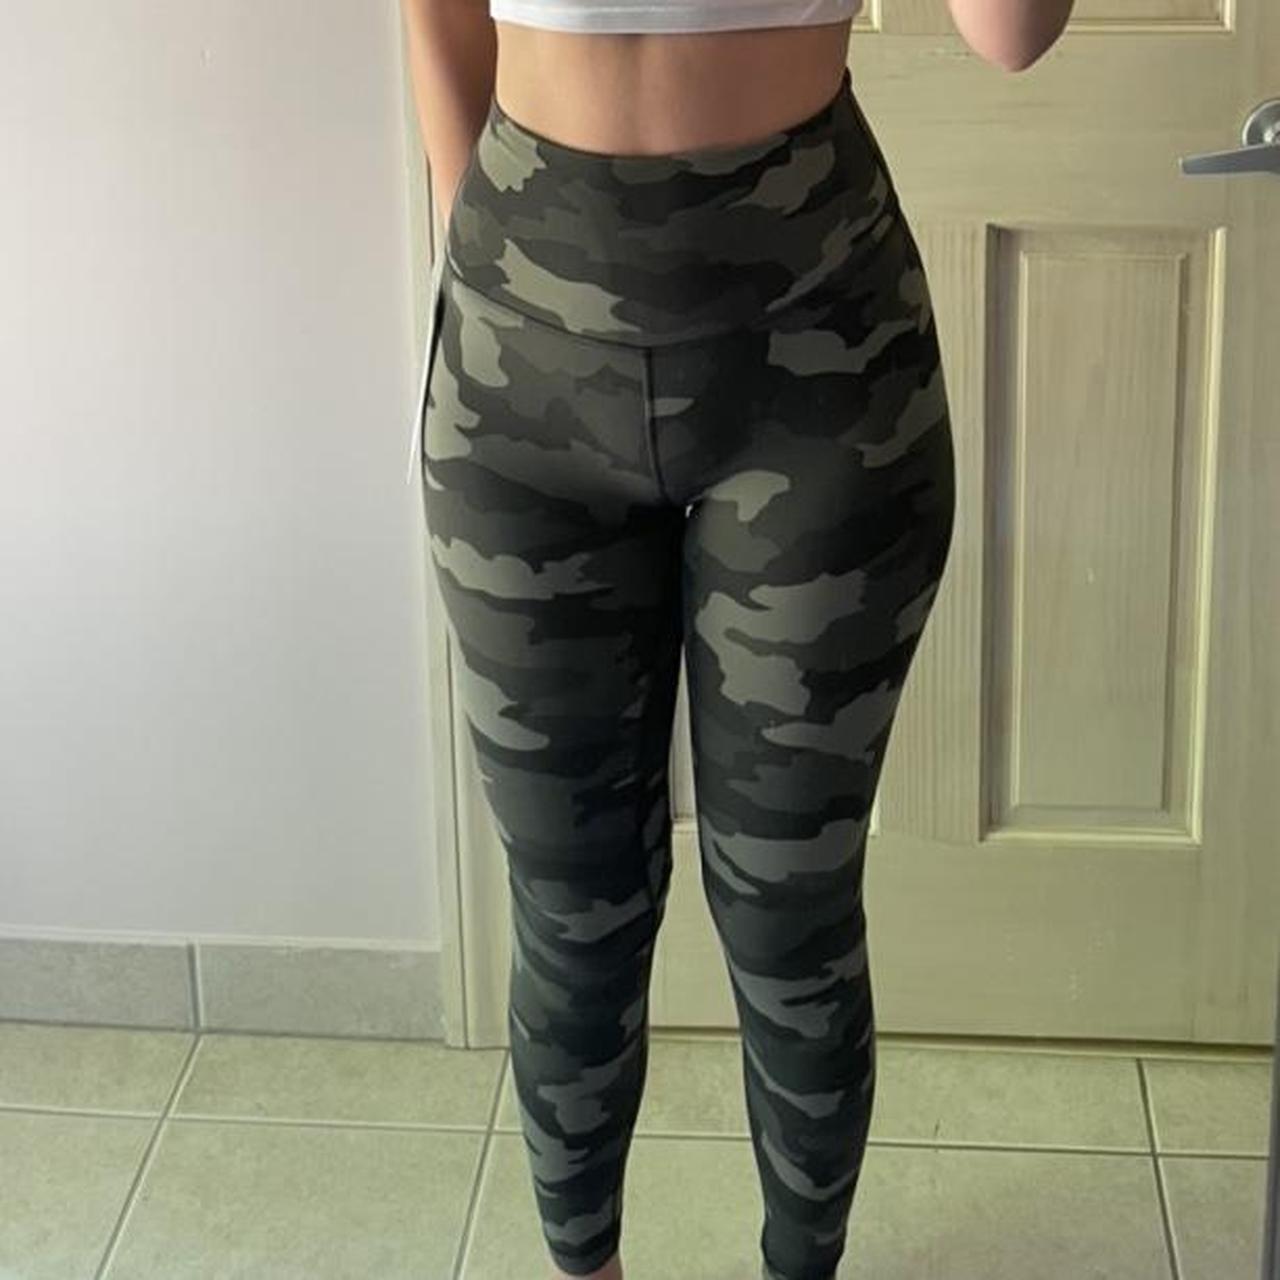 Camo leggings they are around a size 4 and have - Depop